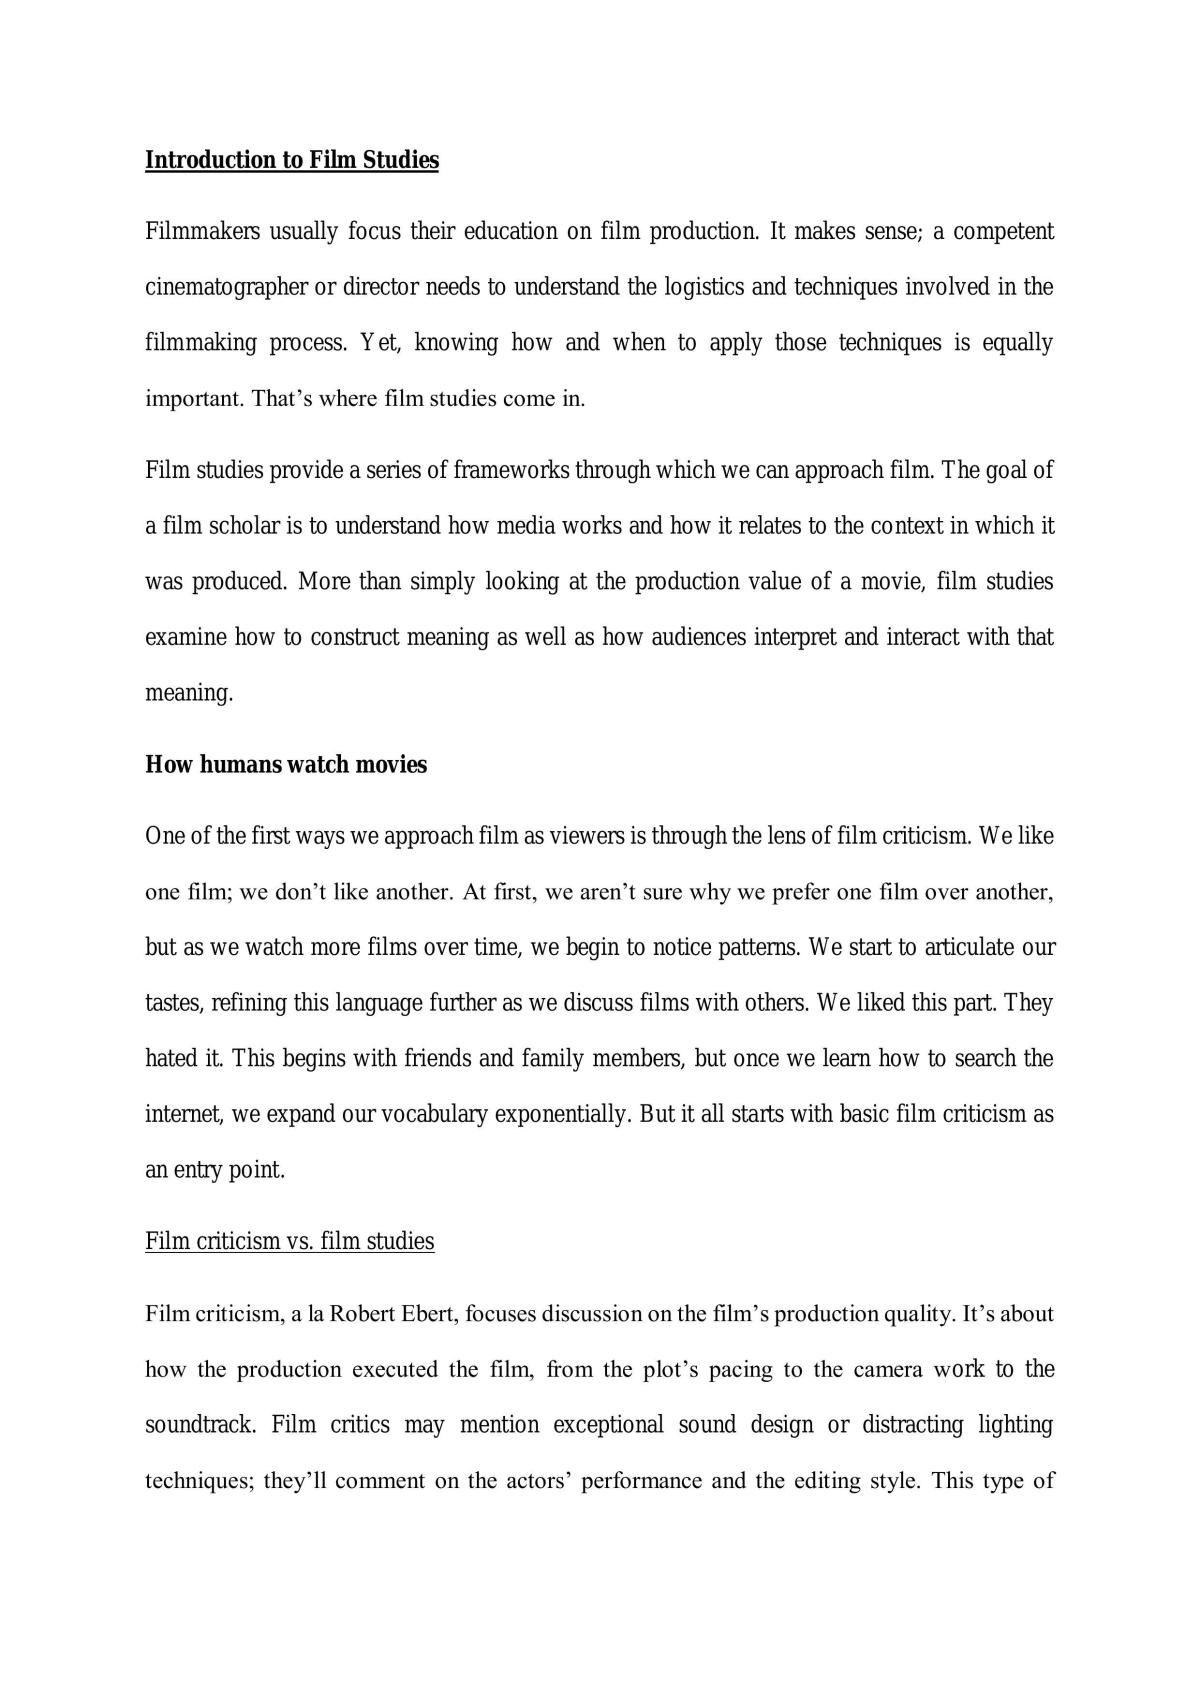 Introduction to Film Studies Essay - Page 1